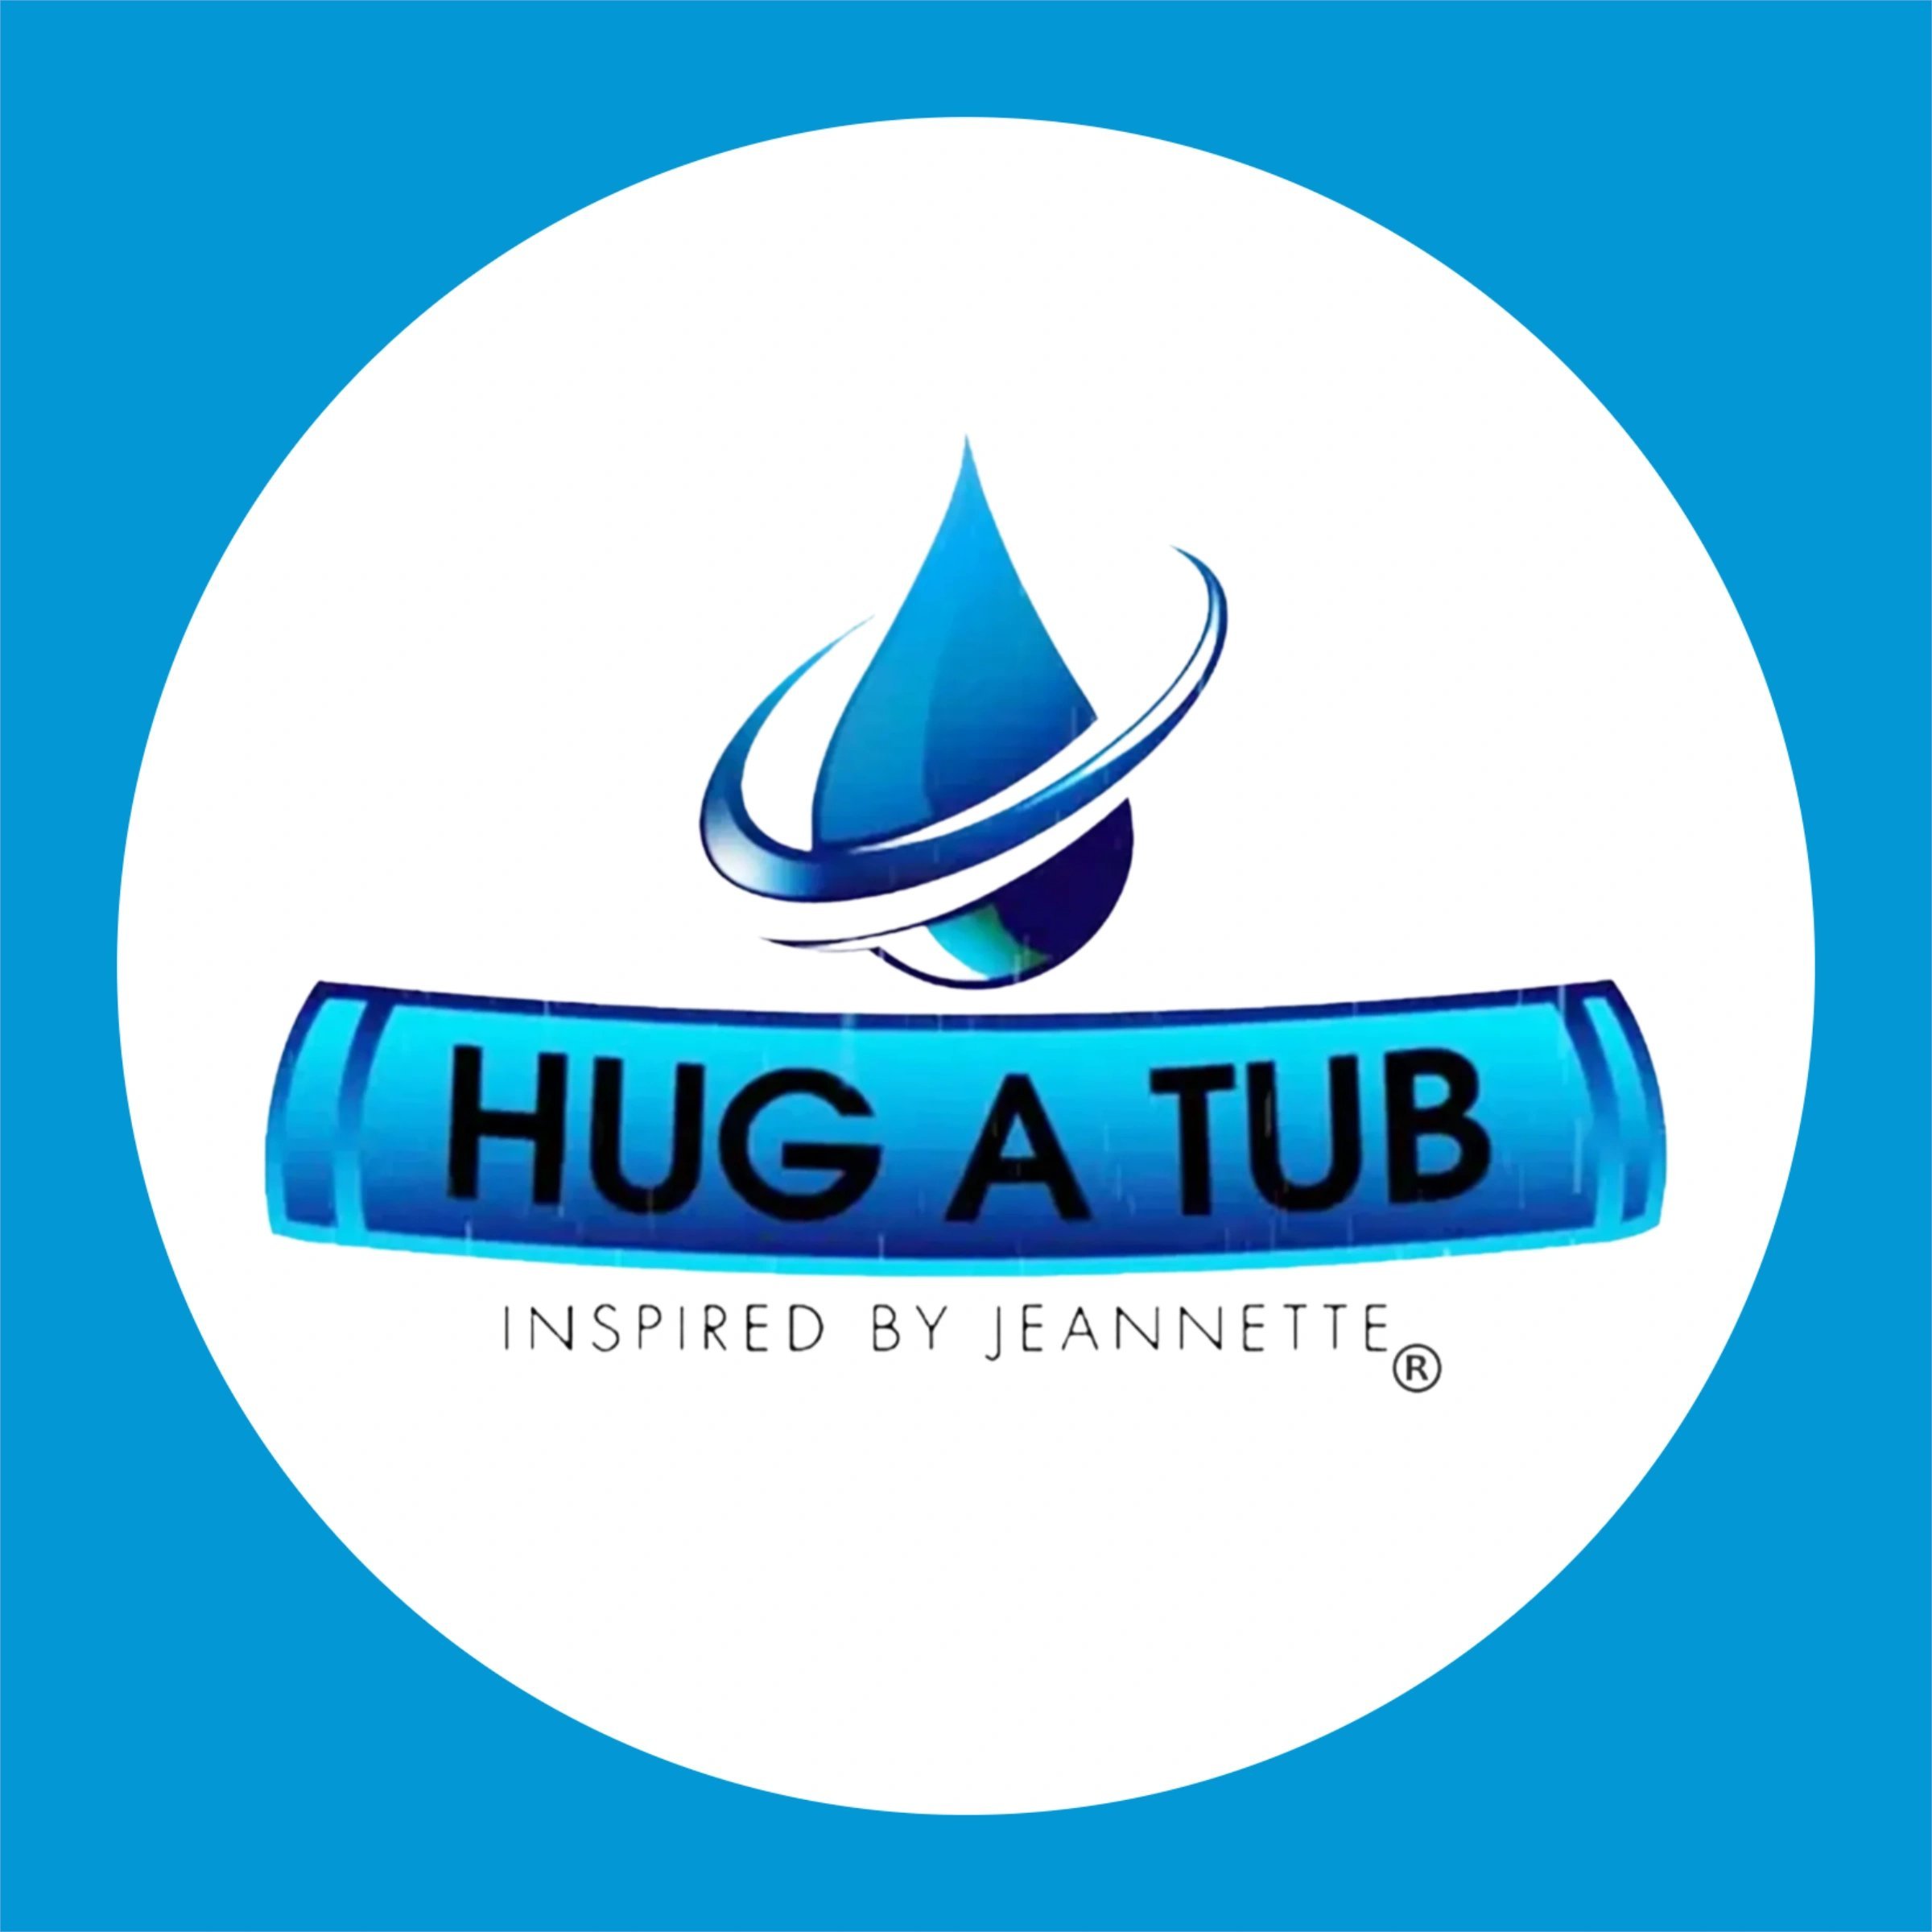 At Hug A Tub, it's our mission to provide an effortless, eco-friendly way to absorb water overflow in the bathroom. Find our products online!